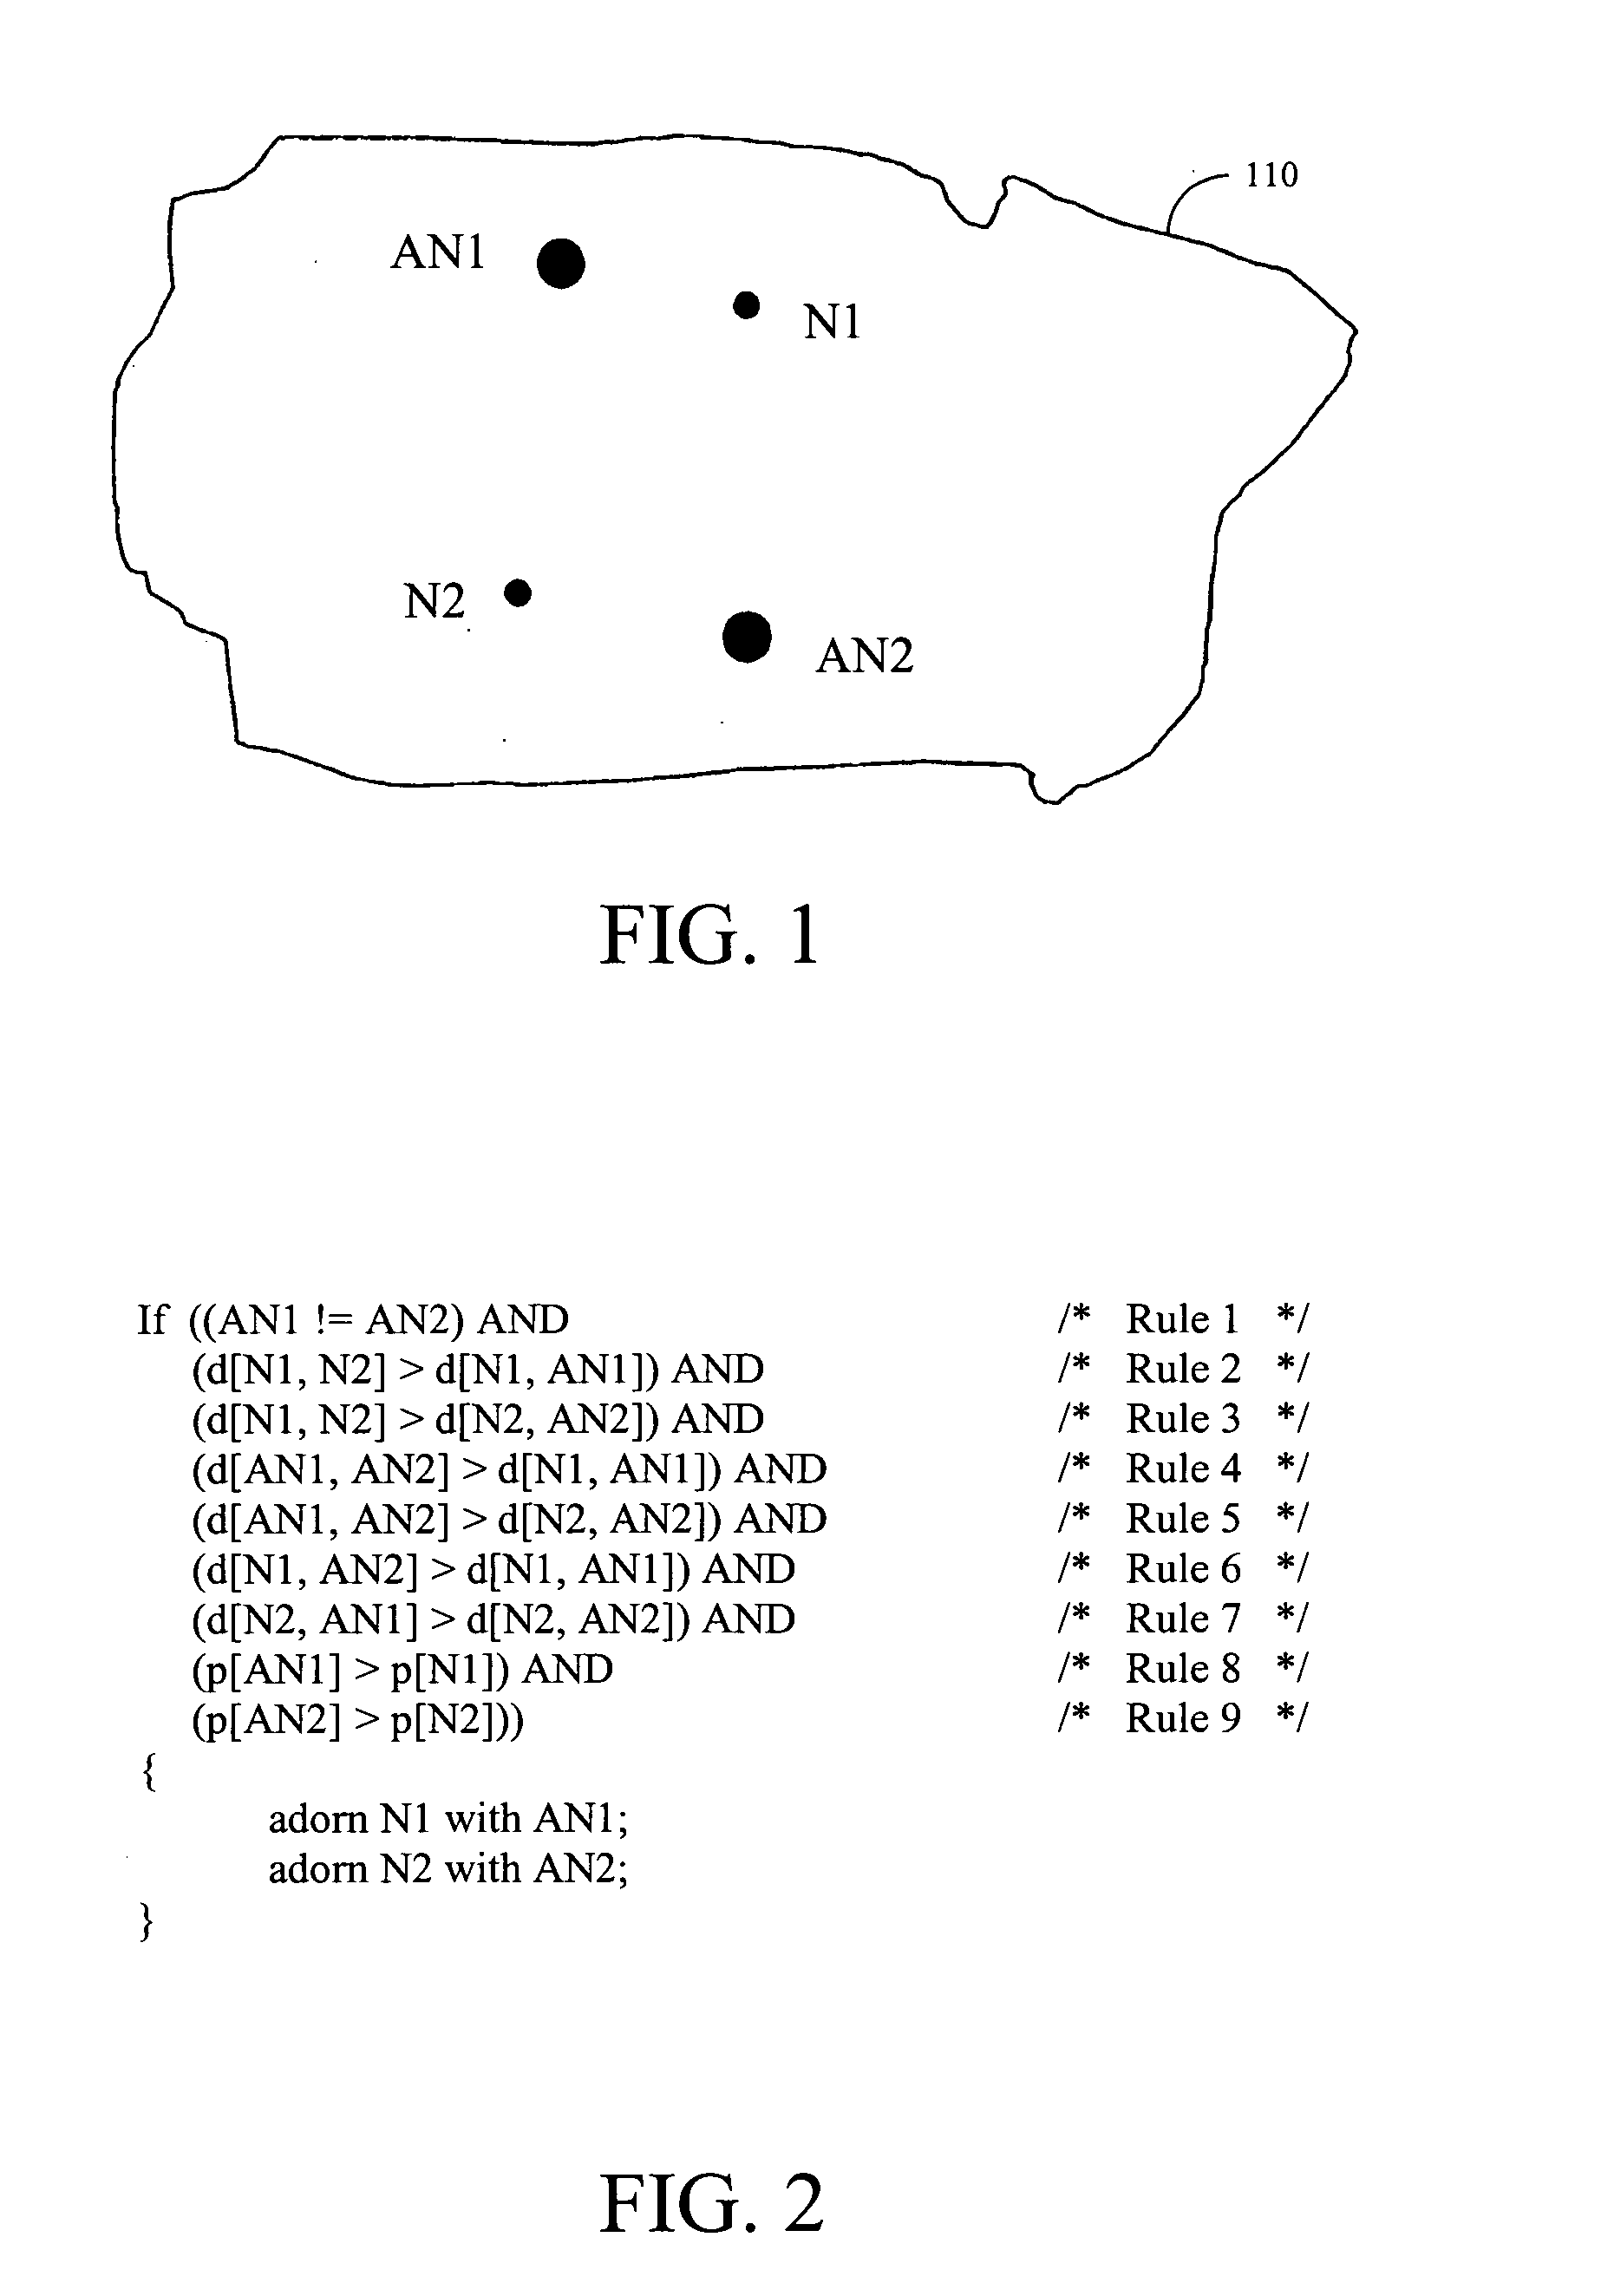 Method for differentiating duplicate or similarly named disjoint localities within a state or other principal geographic unit of interest